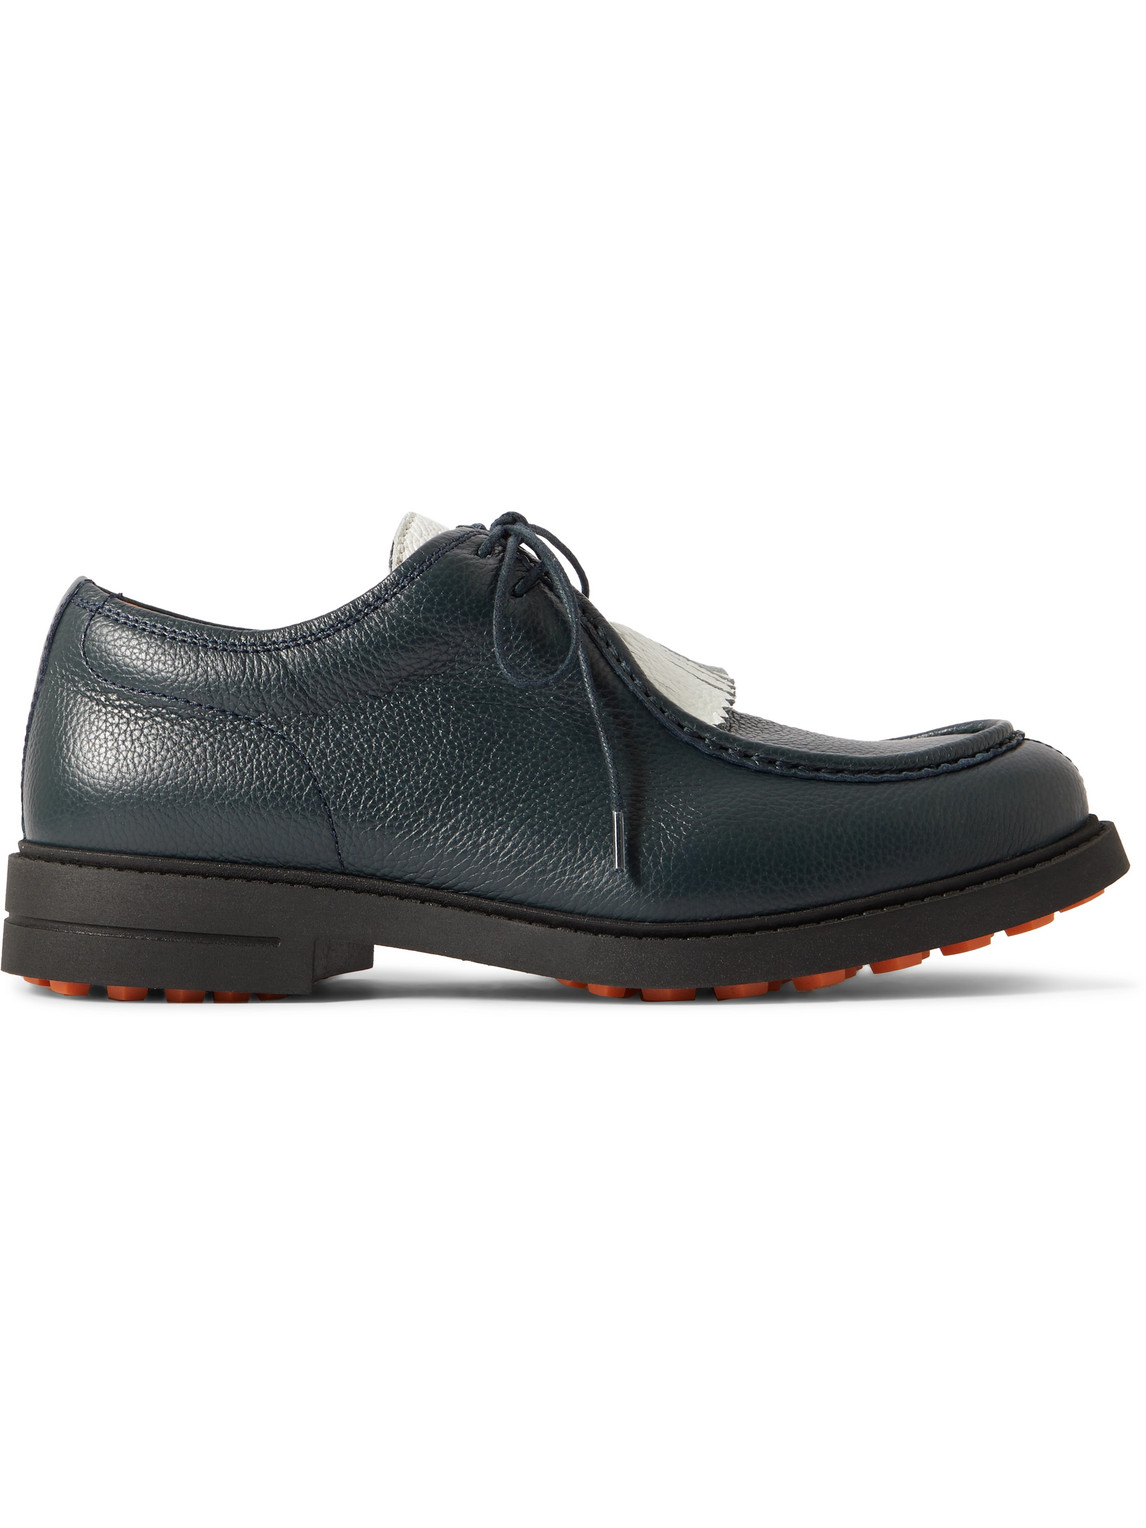 Golf Fringed Full-Grain Leather Shoes